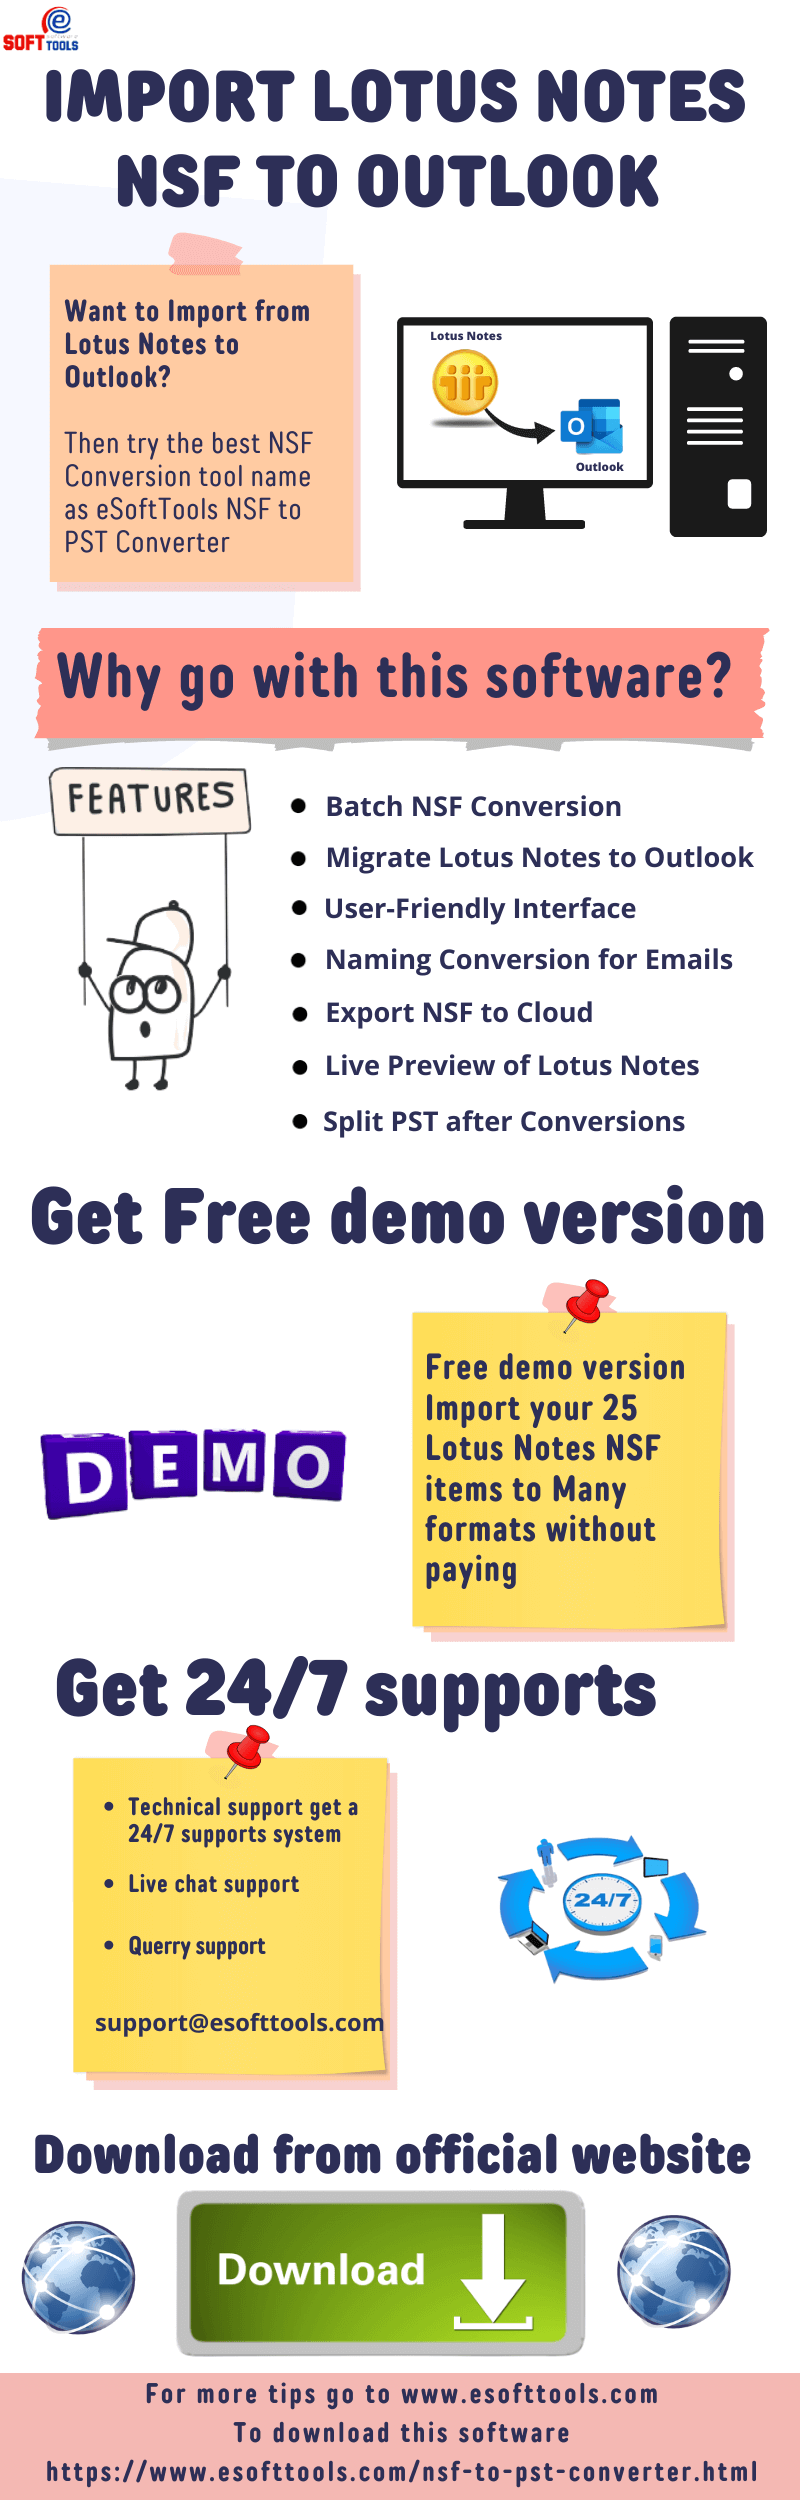 import-lotus-notes-nsf-to-outlook.png